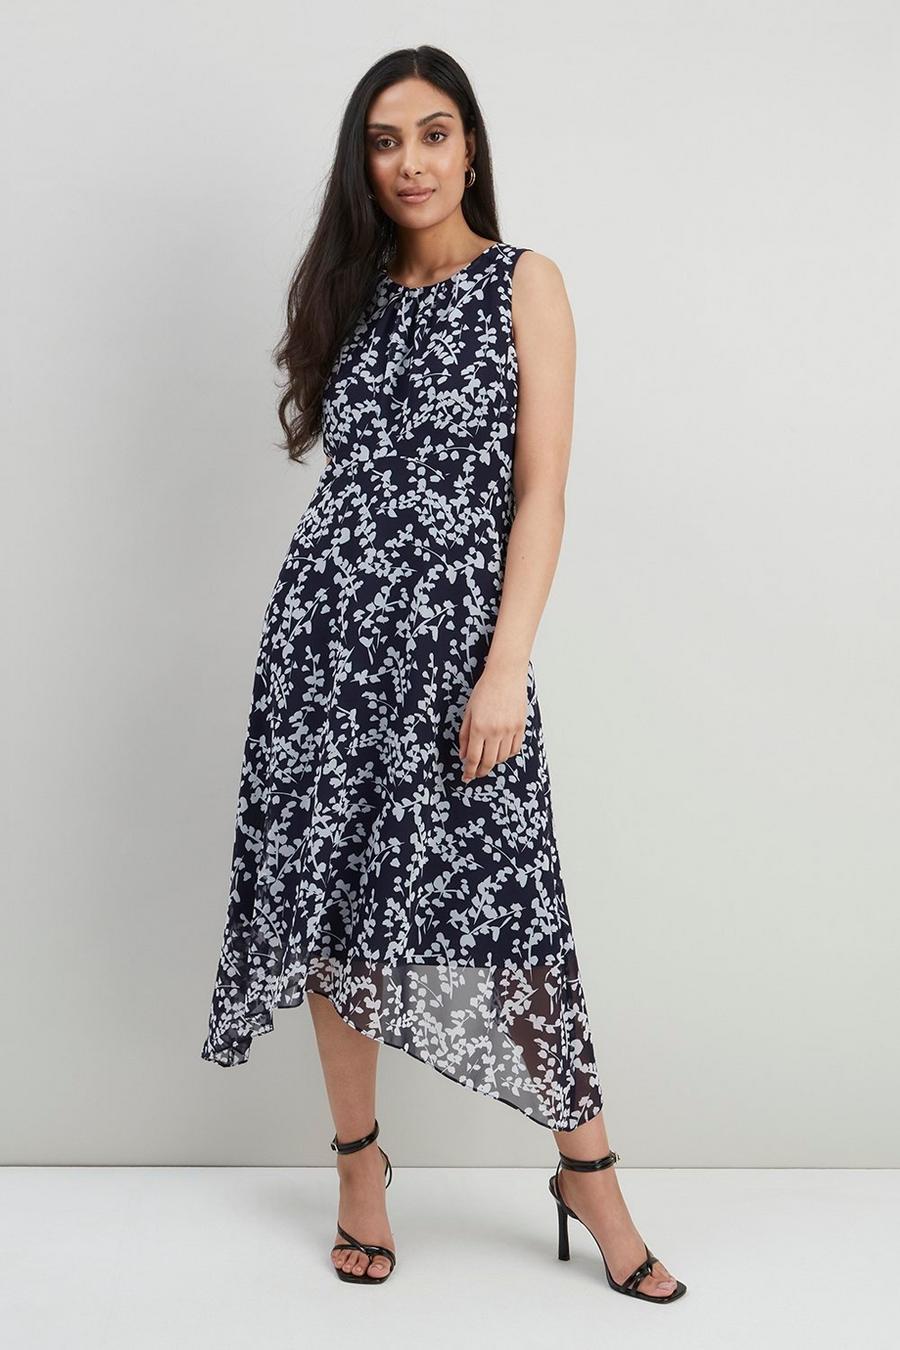 Petite Navy Printed Fit And Flare Dress